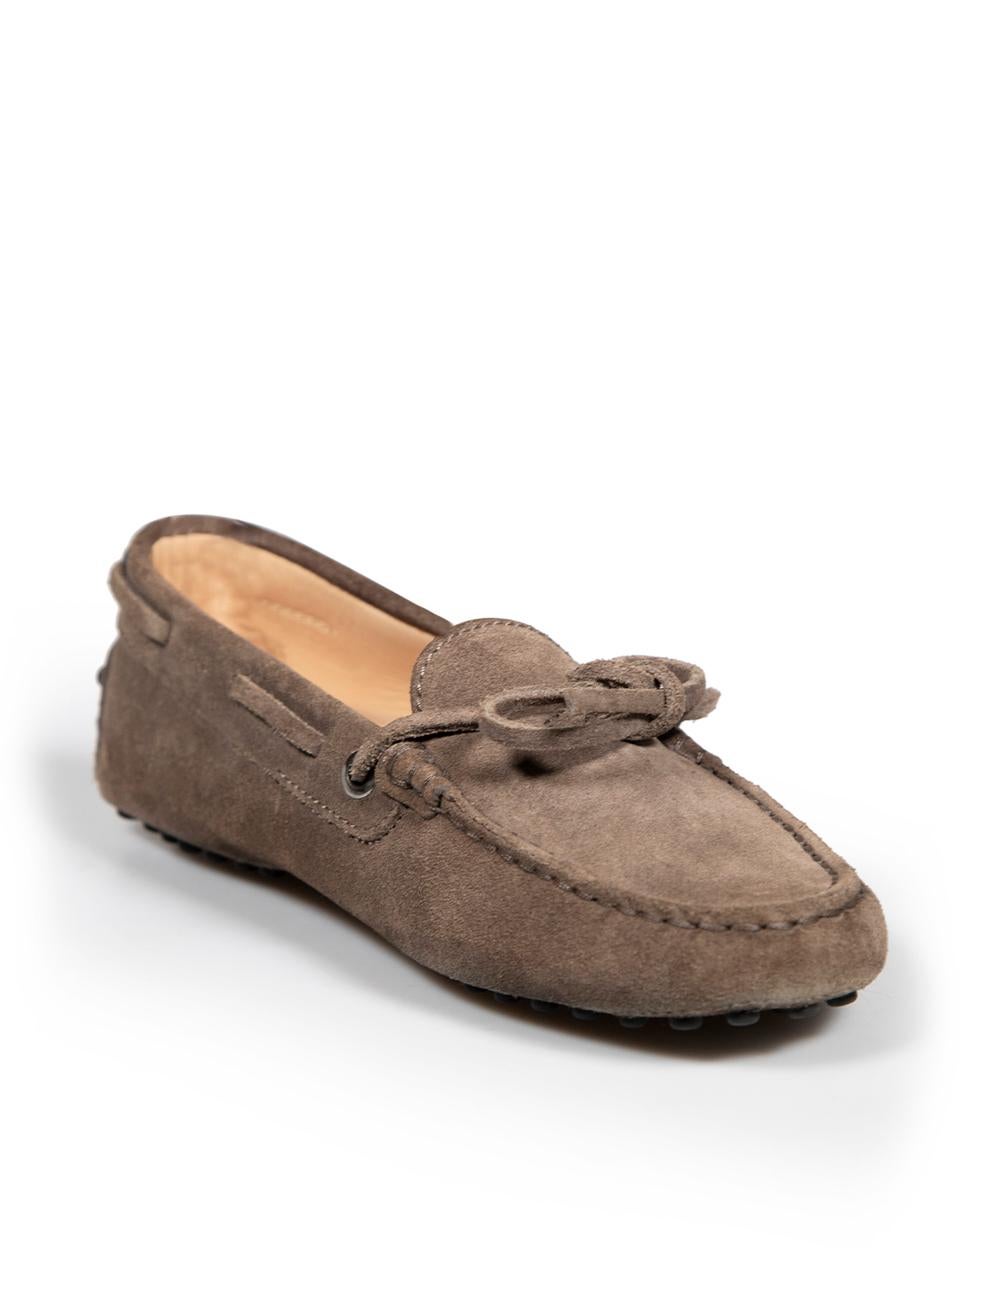 CONDITION is Good. General wear to flats is evident. Moderate signs of wear to the uppers with some light abrasion to the suede pile seen throughout and a small mark can be seen on the right side of the right shoe. Clear abrasion is also seen on the